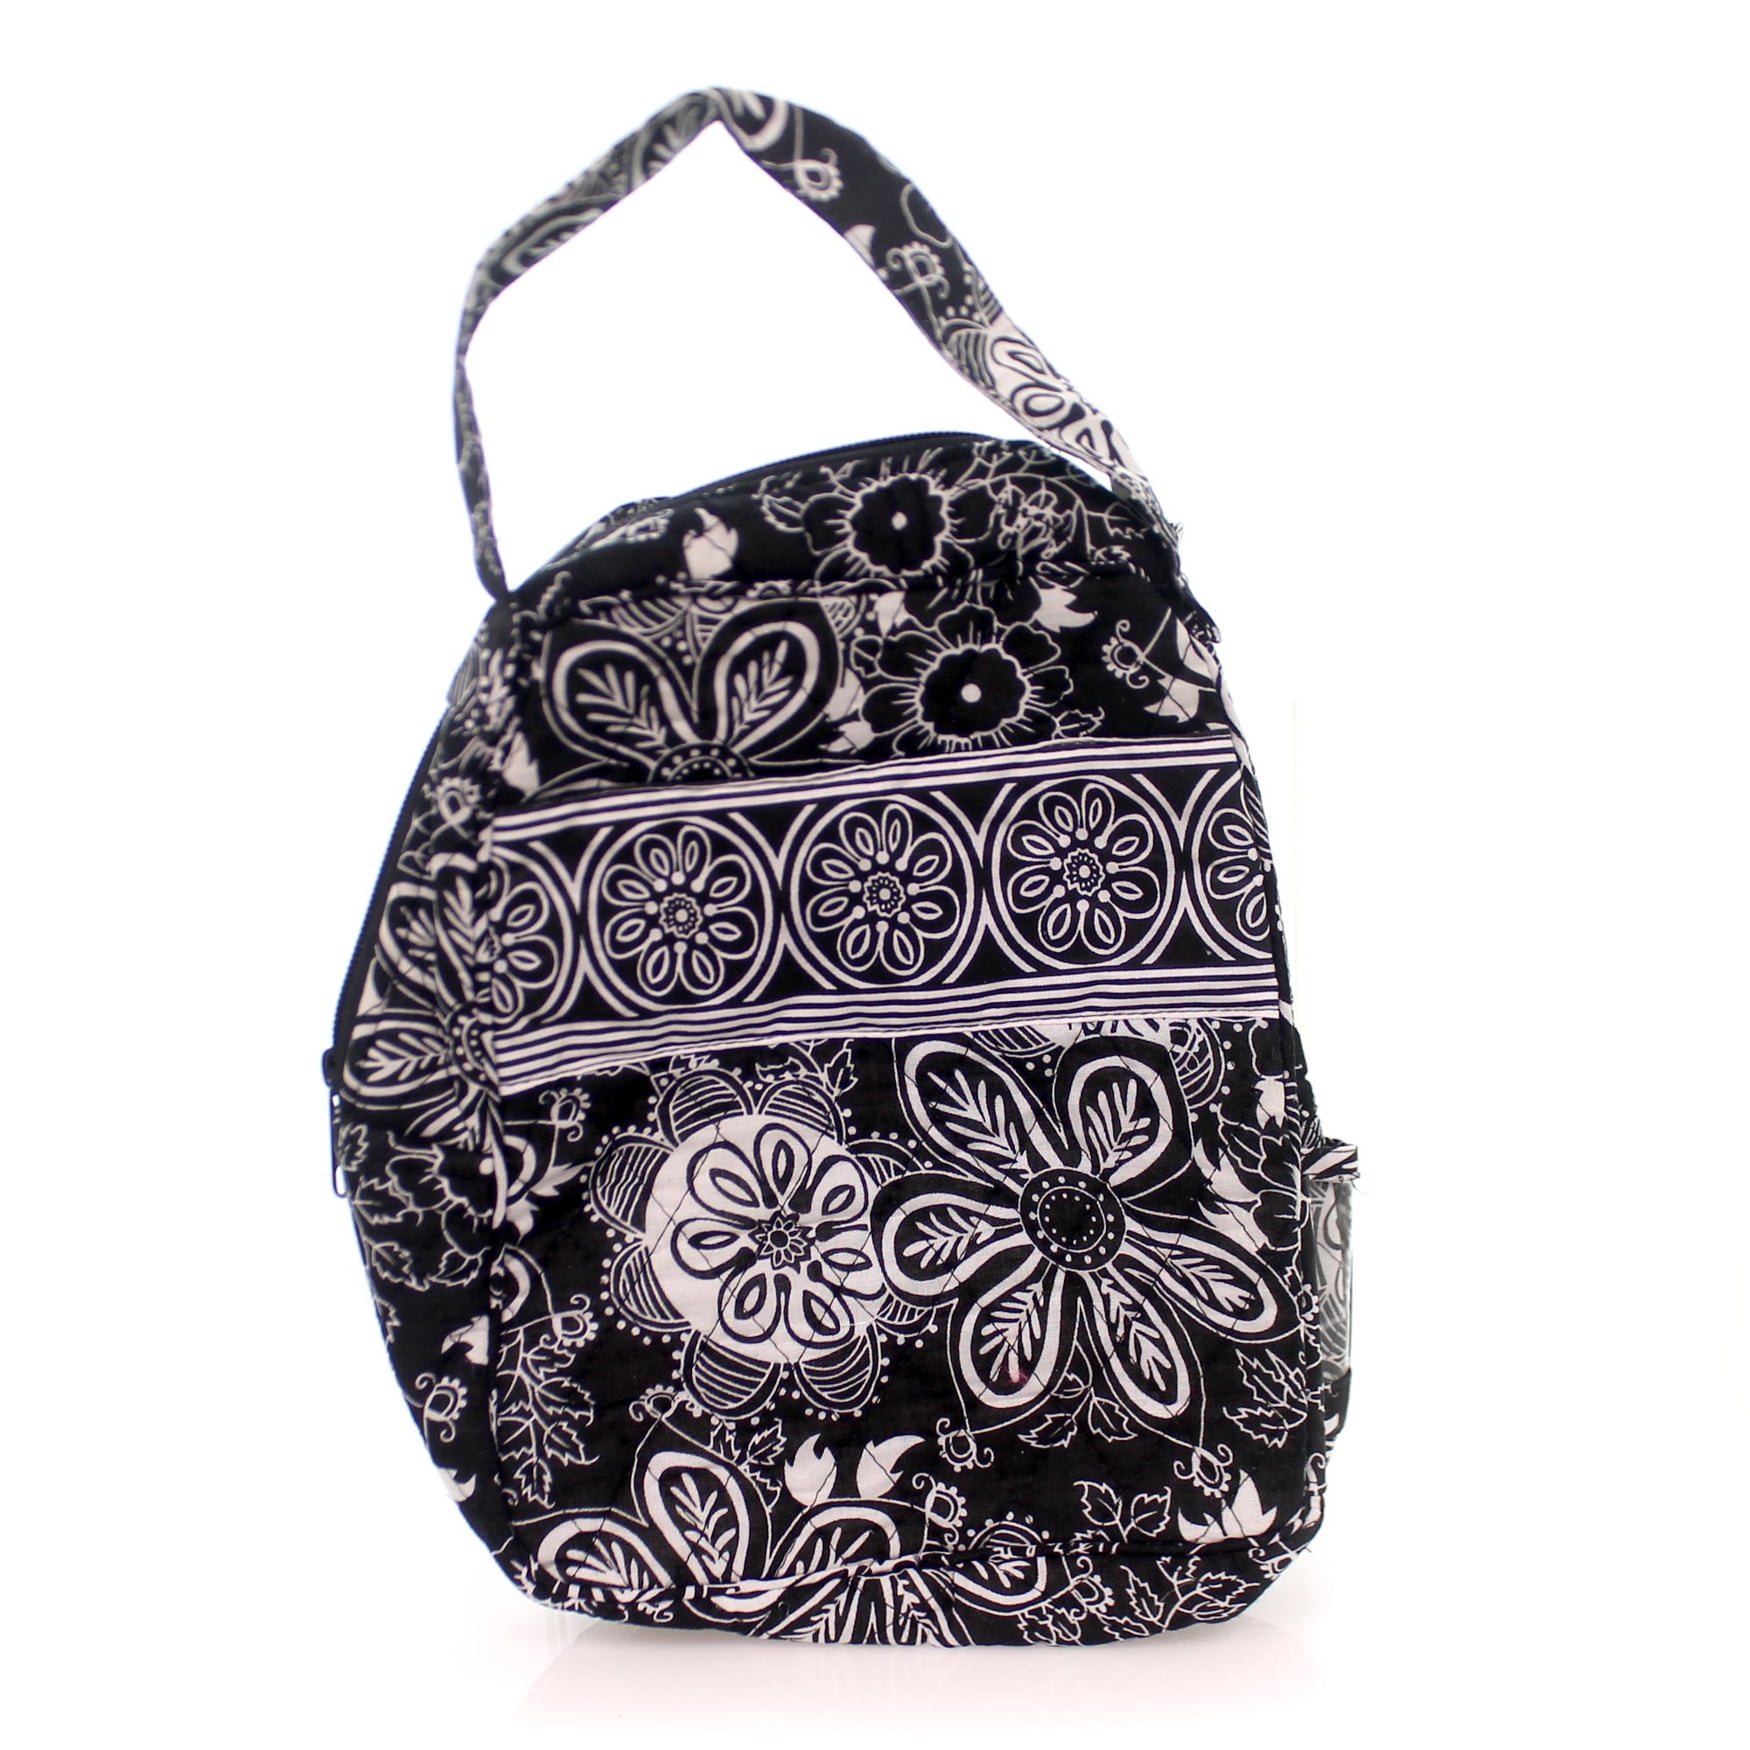 Handbags INSULATED ZIPPERED LUNCH BAG Fabric Food Travel